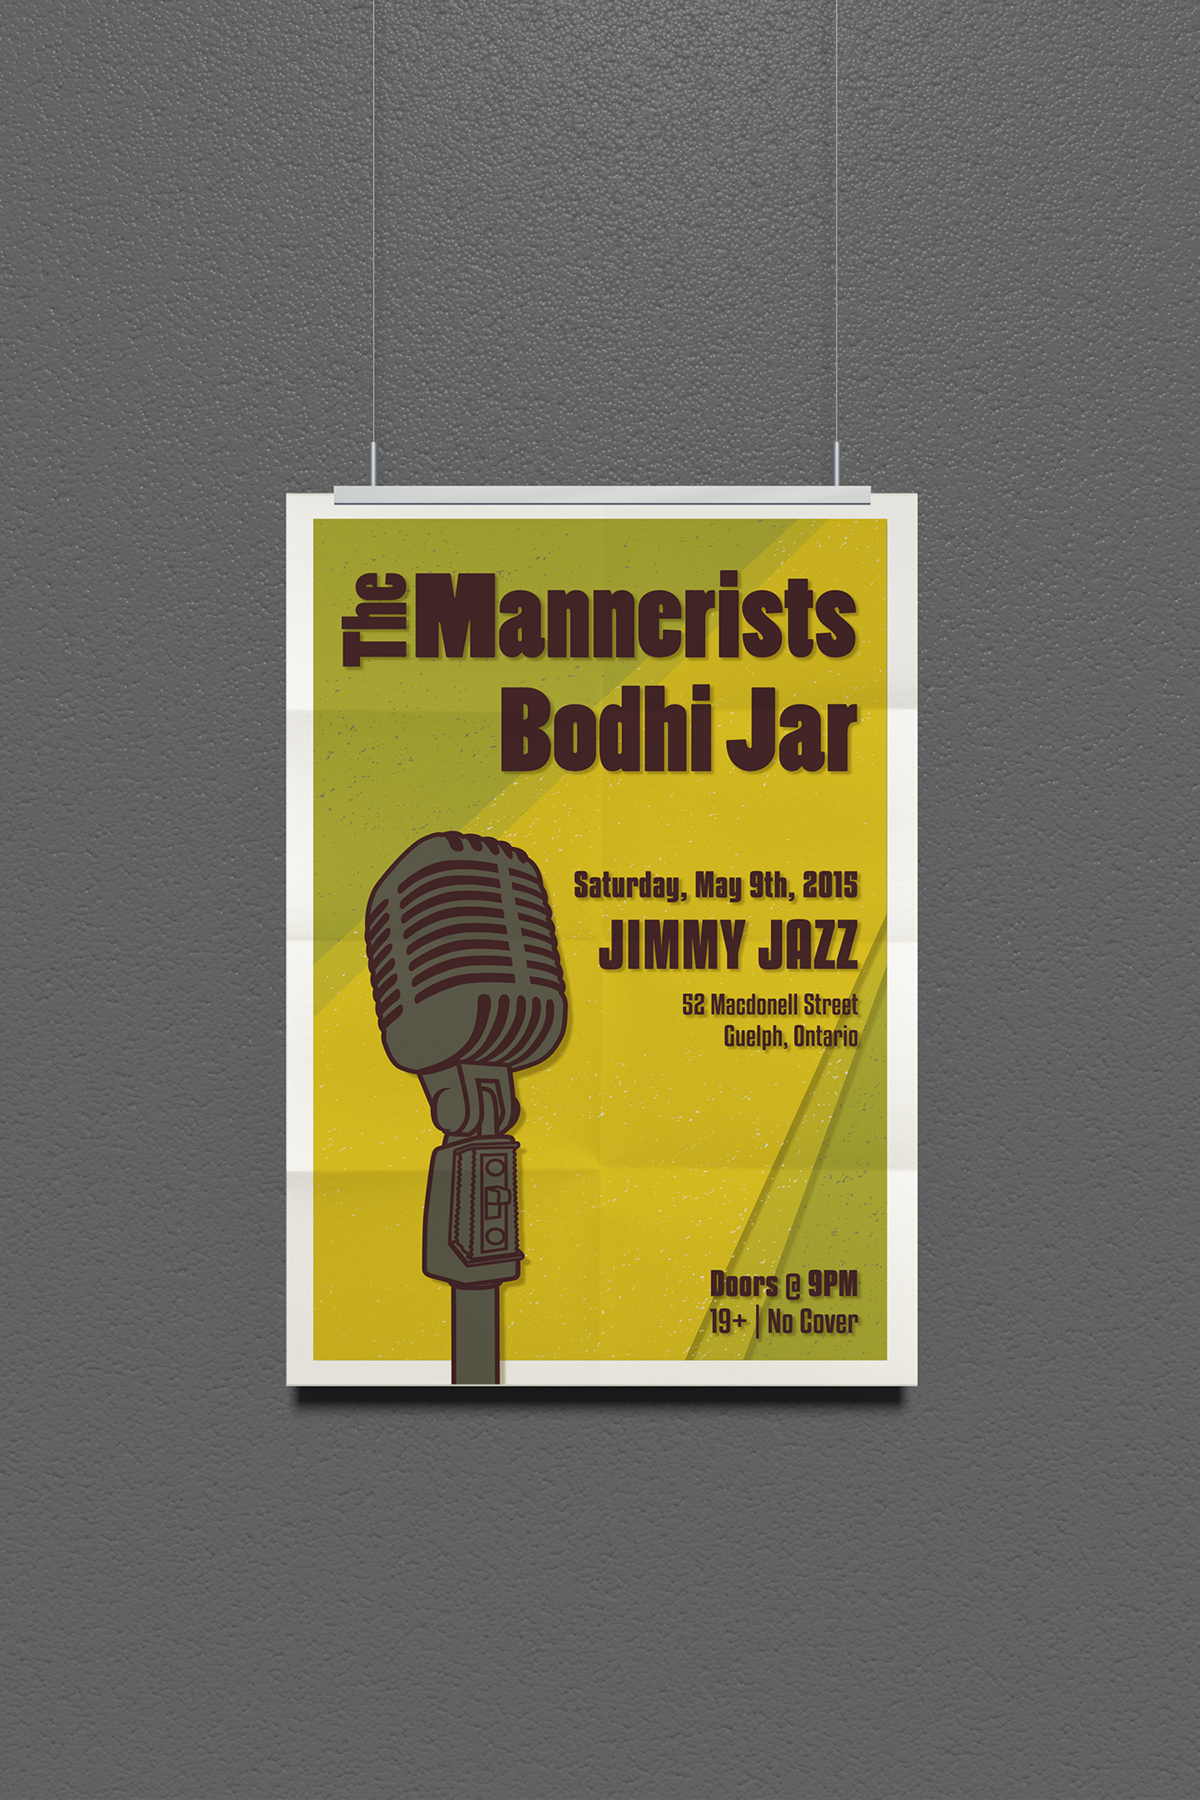 poster social media Social Media Imagery live show music venue digital illustration Retro textured weathered Compression Microphone microphone spotlight Bodhi Jar The Mannerists Jimmy Jazz